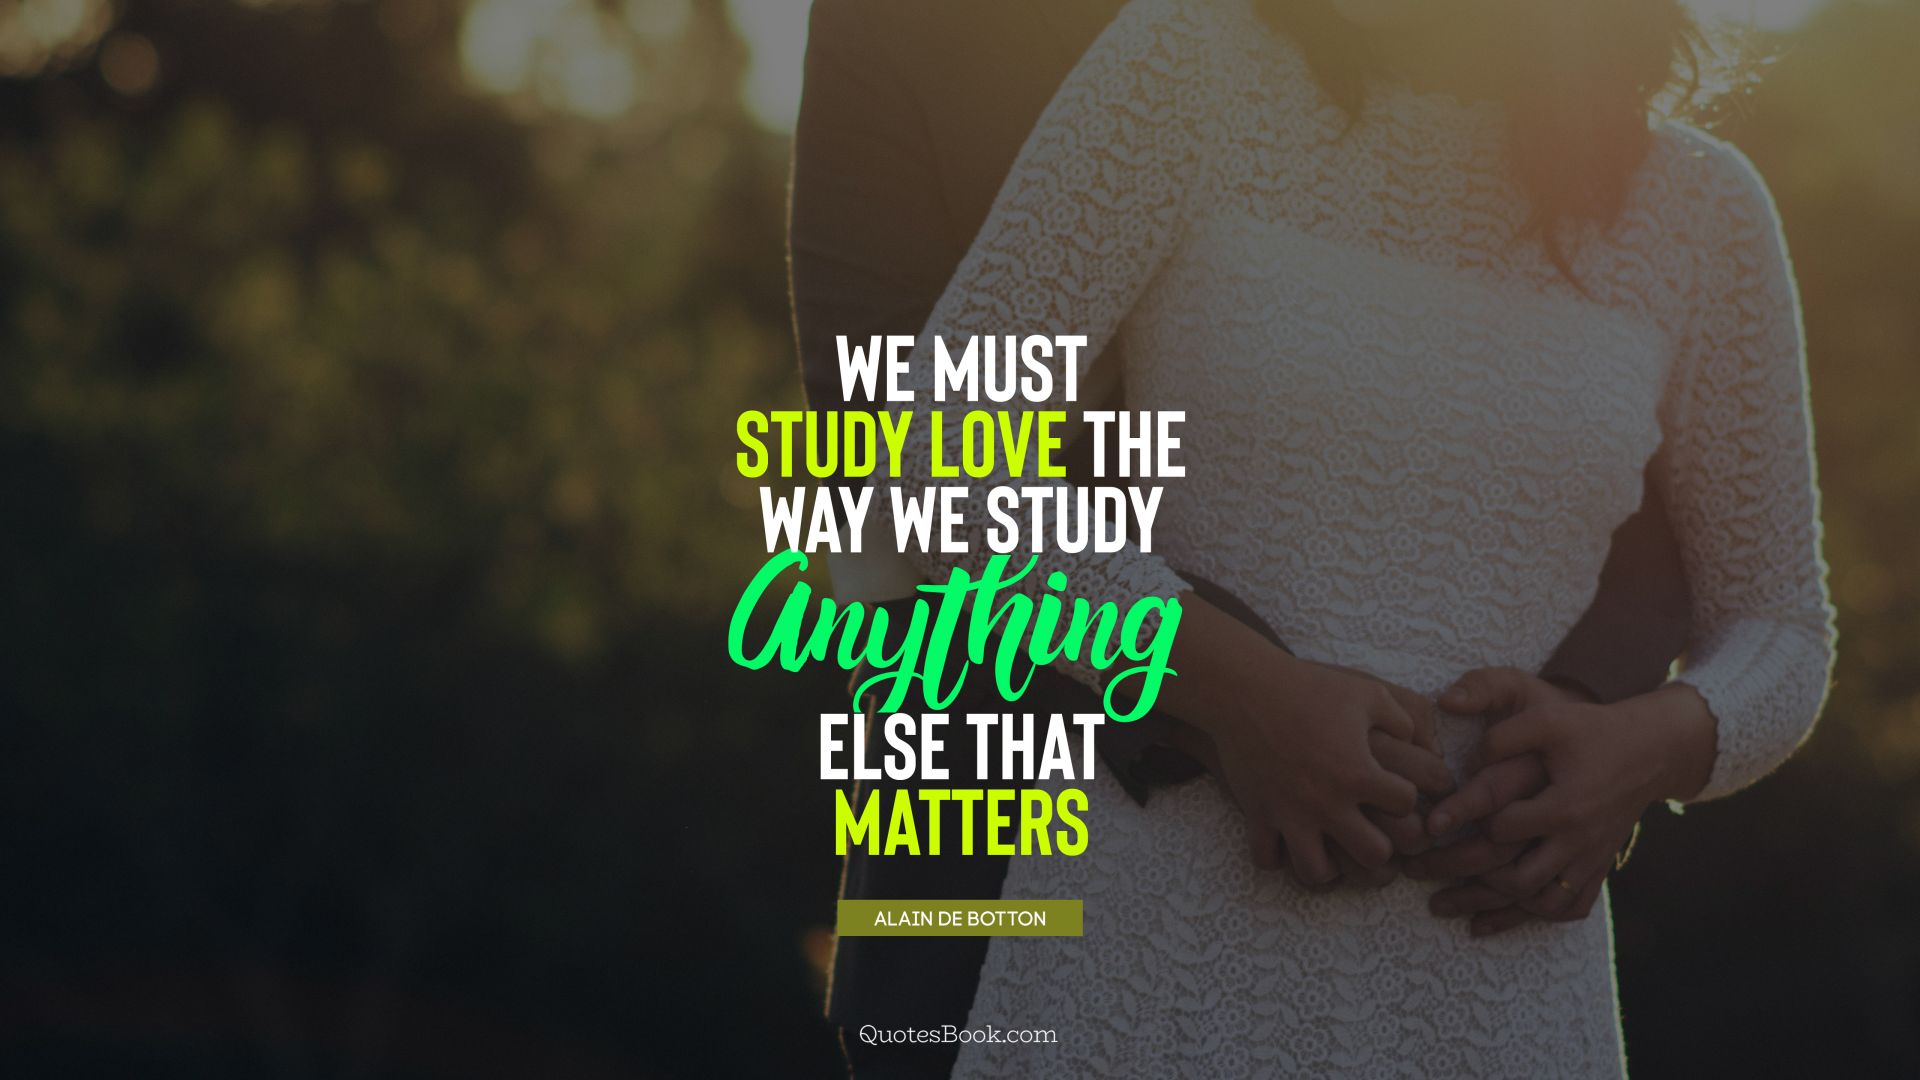 We must study love the way we study anything else that matters. - Quote by Alain de Botton